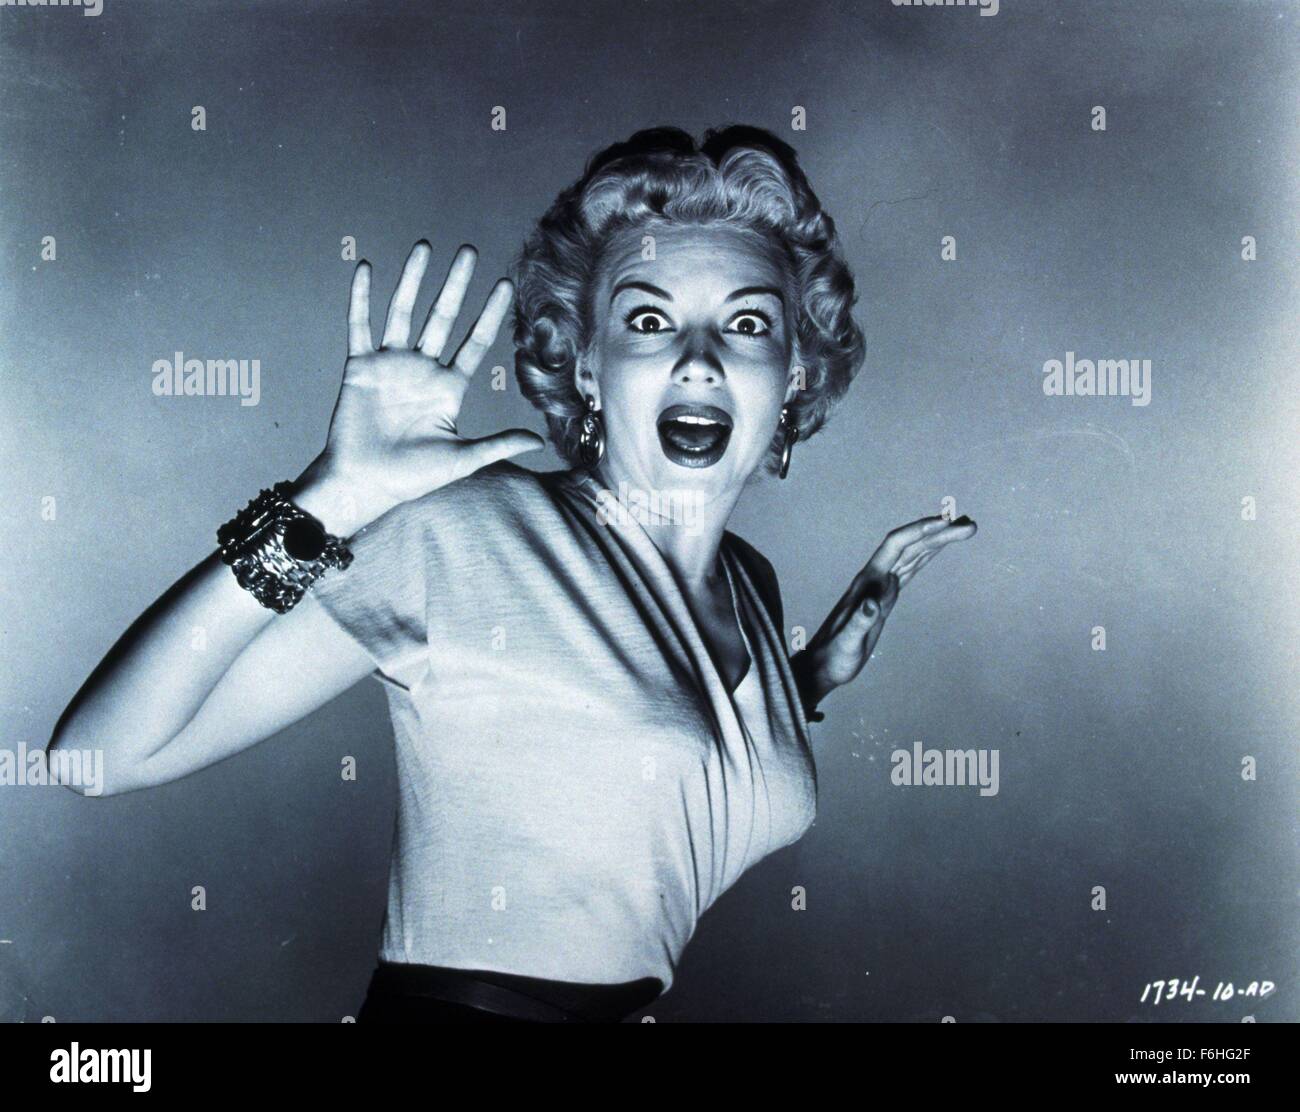 1953, Film Title: IT CAME FROM OUTER SPACE, Director: ARNOLD, Studio: UNIVERSAL, Pictured: ARNOLD, KATHLEEN HUGHES, SCREAMING, WOMEN IN DANGER. (Credit Image: SNAP) Stock Photo